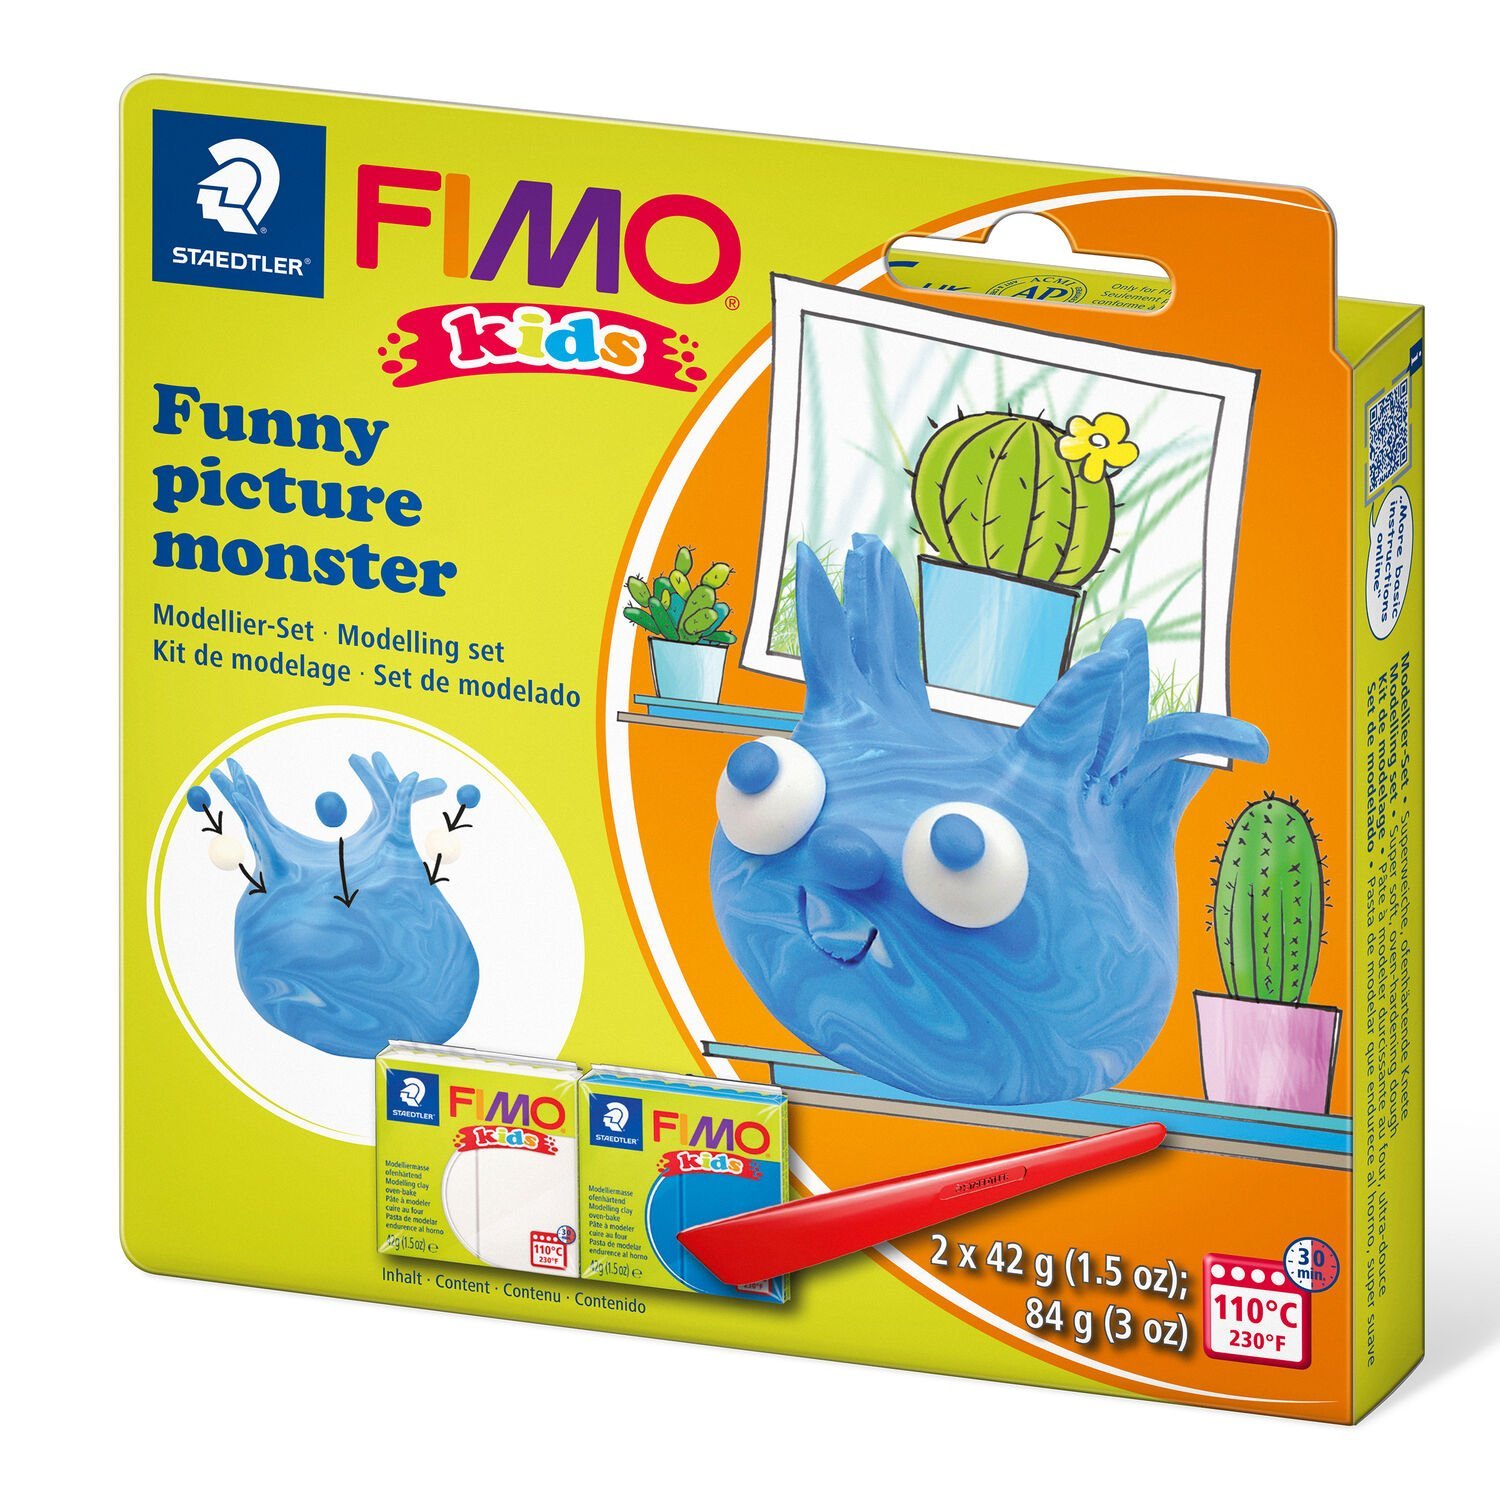 Set "picture monster" containing 2 blocks à 42 g (white, blue), modelling stick